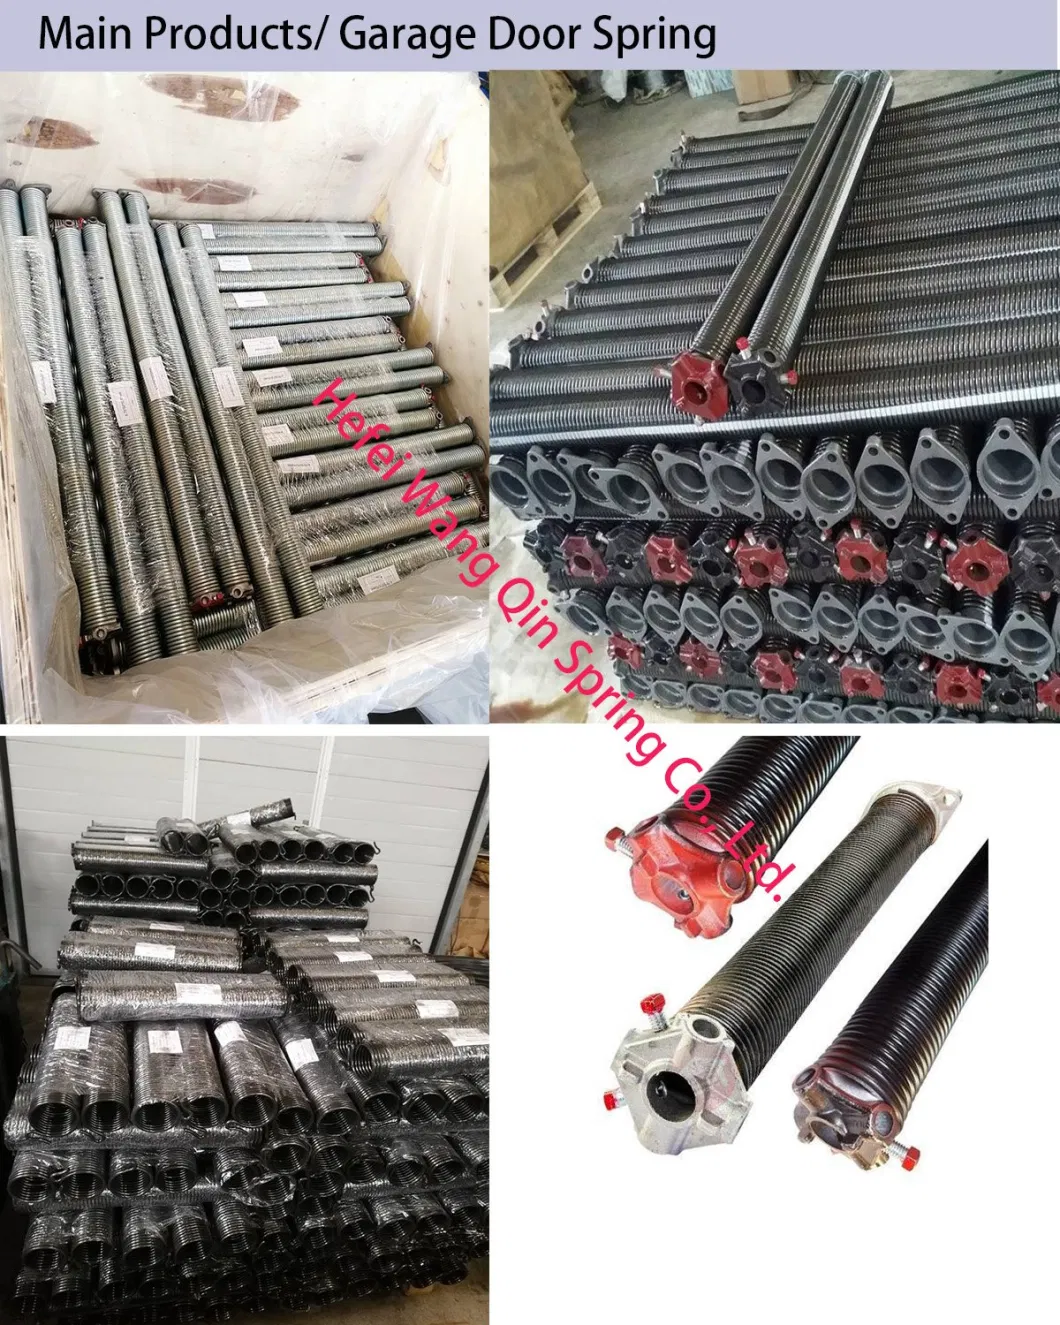 Heavy Duty Steel Garage Door Torsion Spring with Competitive Price and High Quality